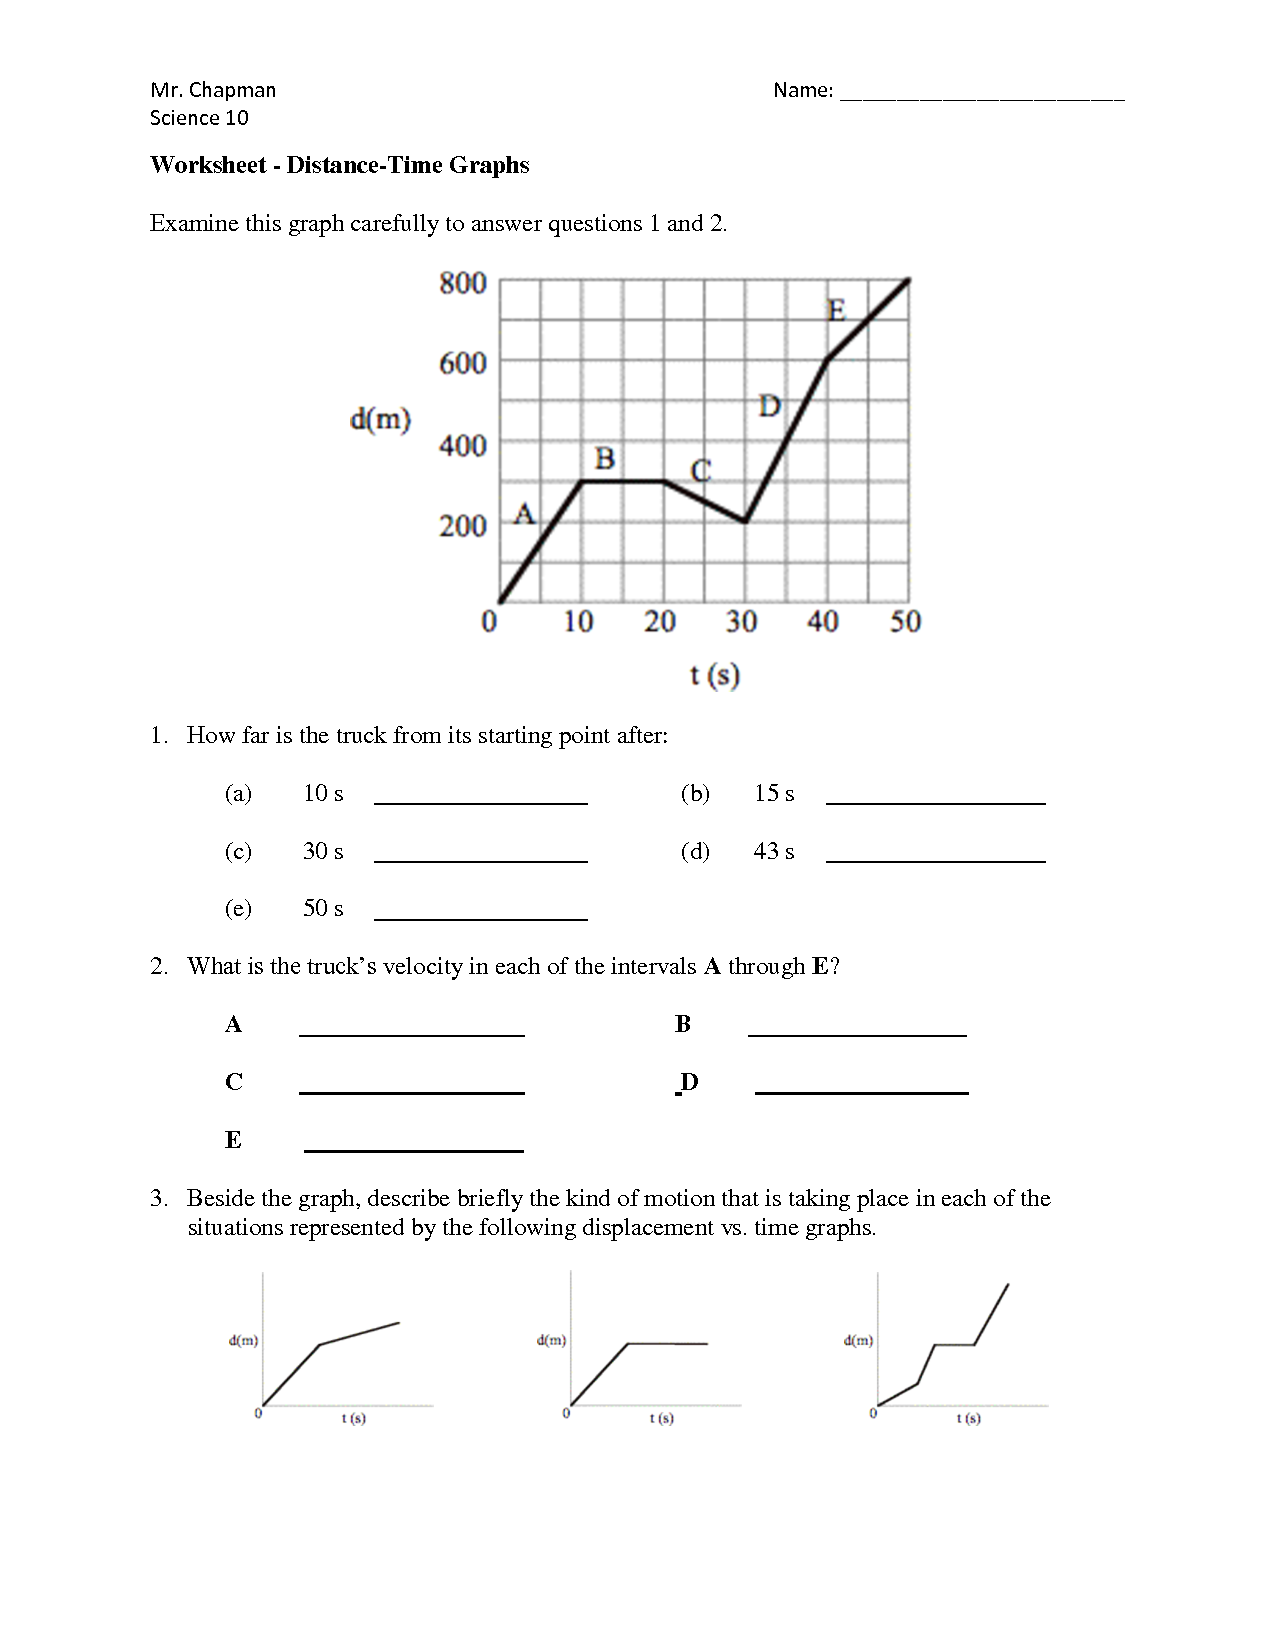 distance-time-graph-worksheet-free-download-gambr-co